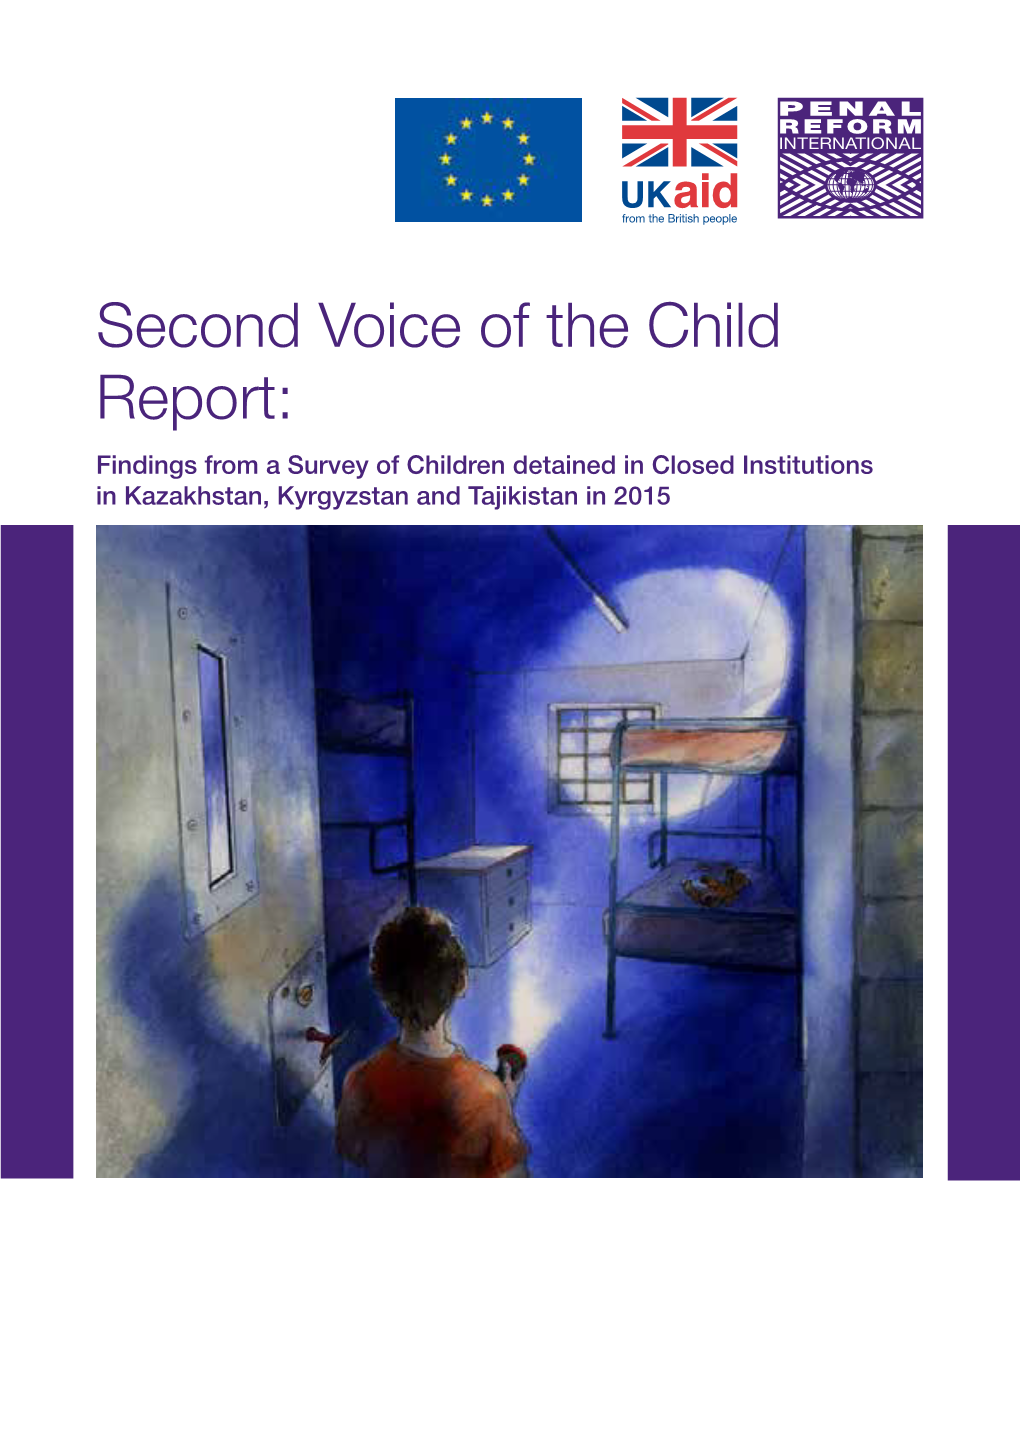 Second Voice of the Child Report: Findings from a Survey of Children Detained in Closed Institutions in Kazakhstan, Kyrgyzstan and Tajikistan in 2015 ﻿